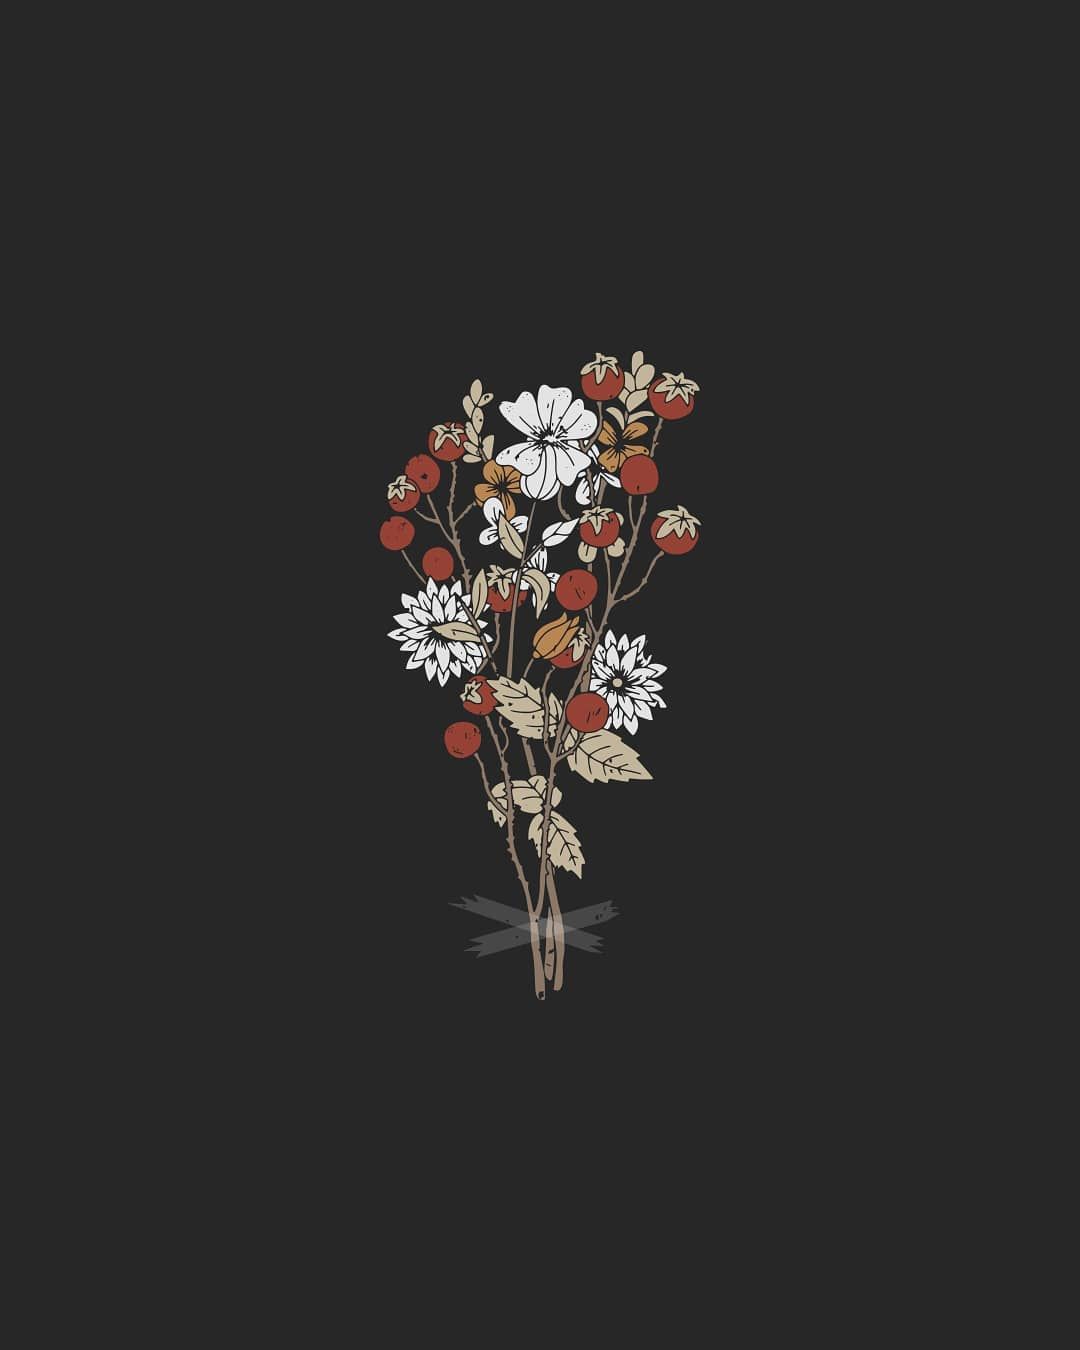 A black background with a white, red, and brown bouquet of flowers. - Flower